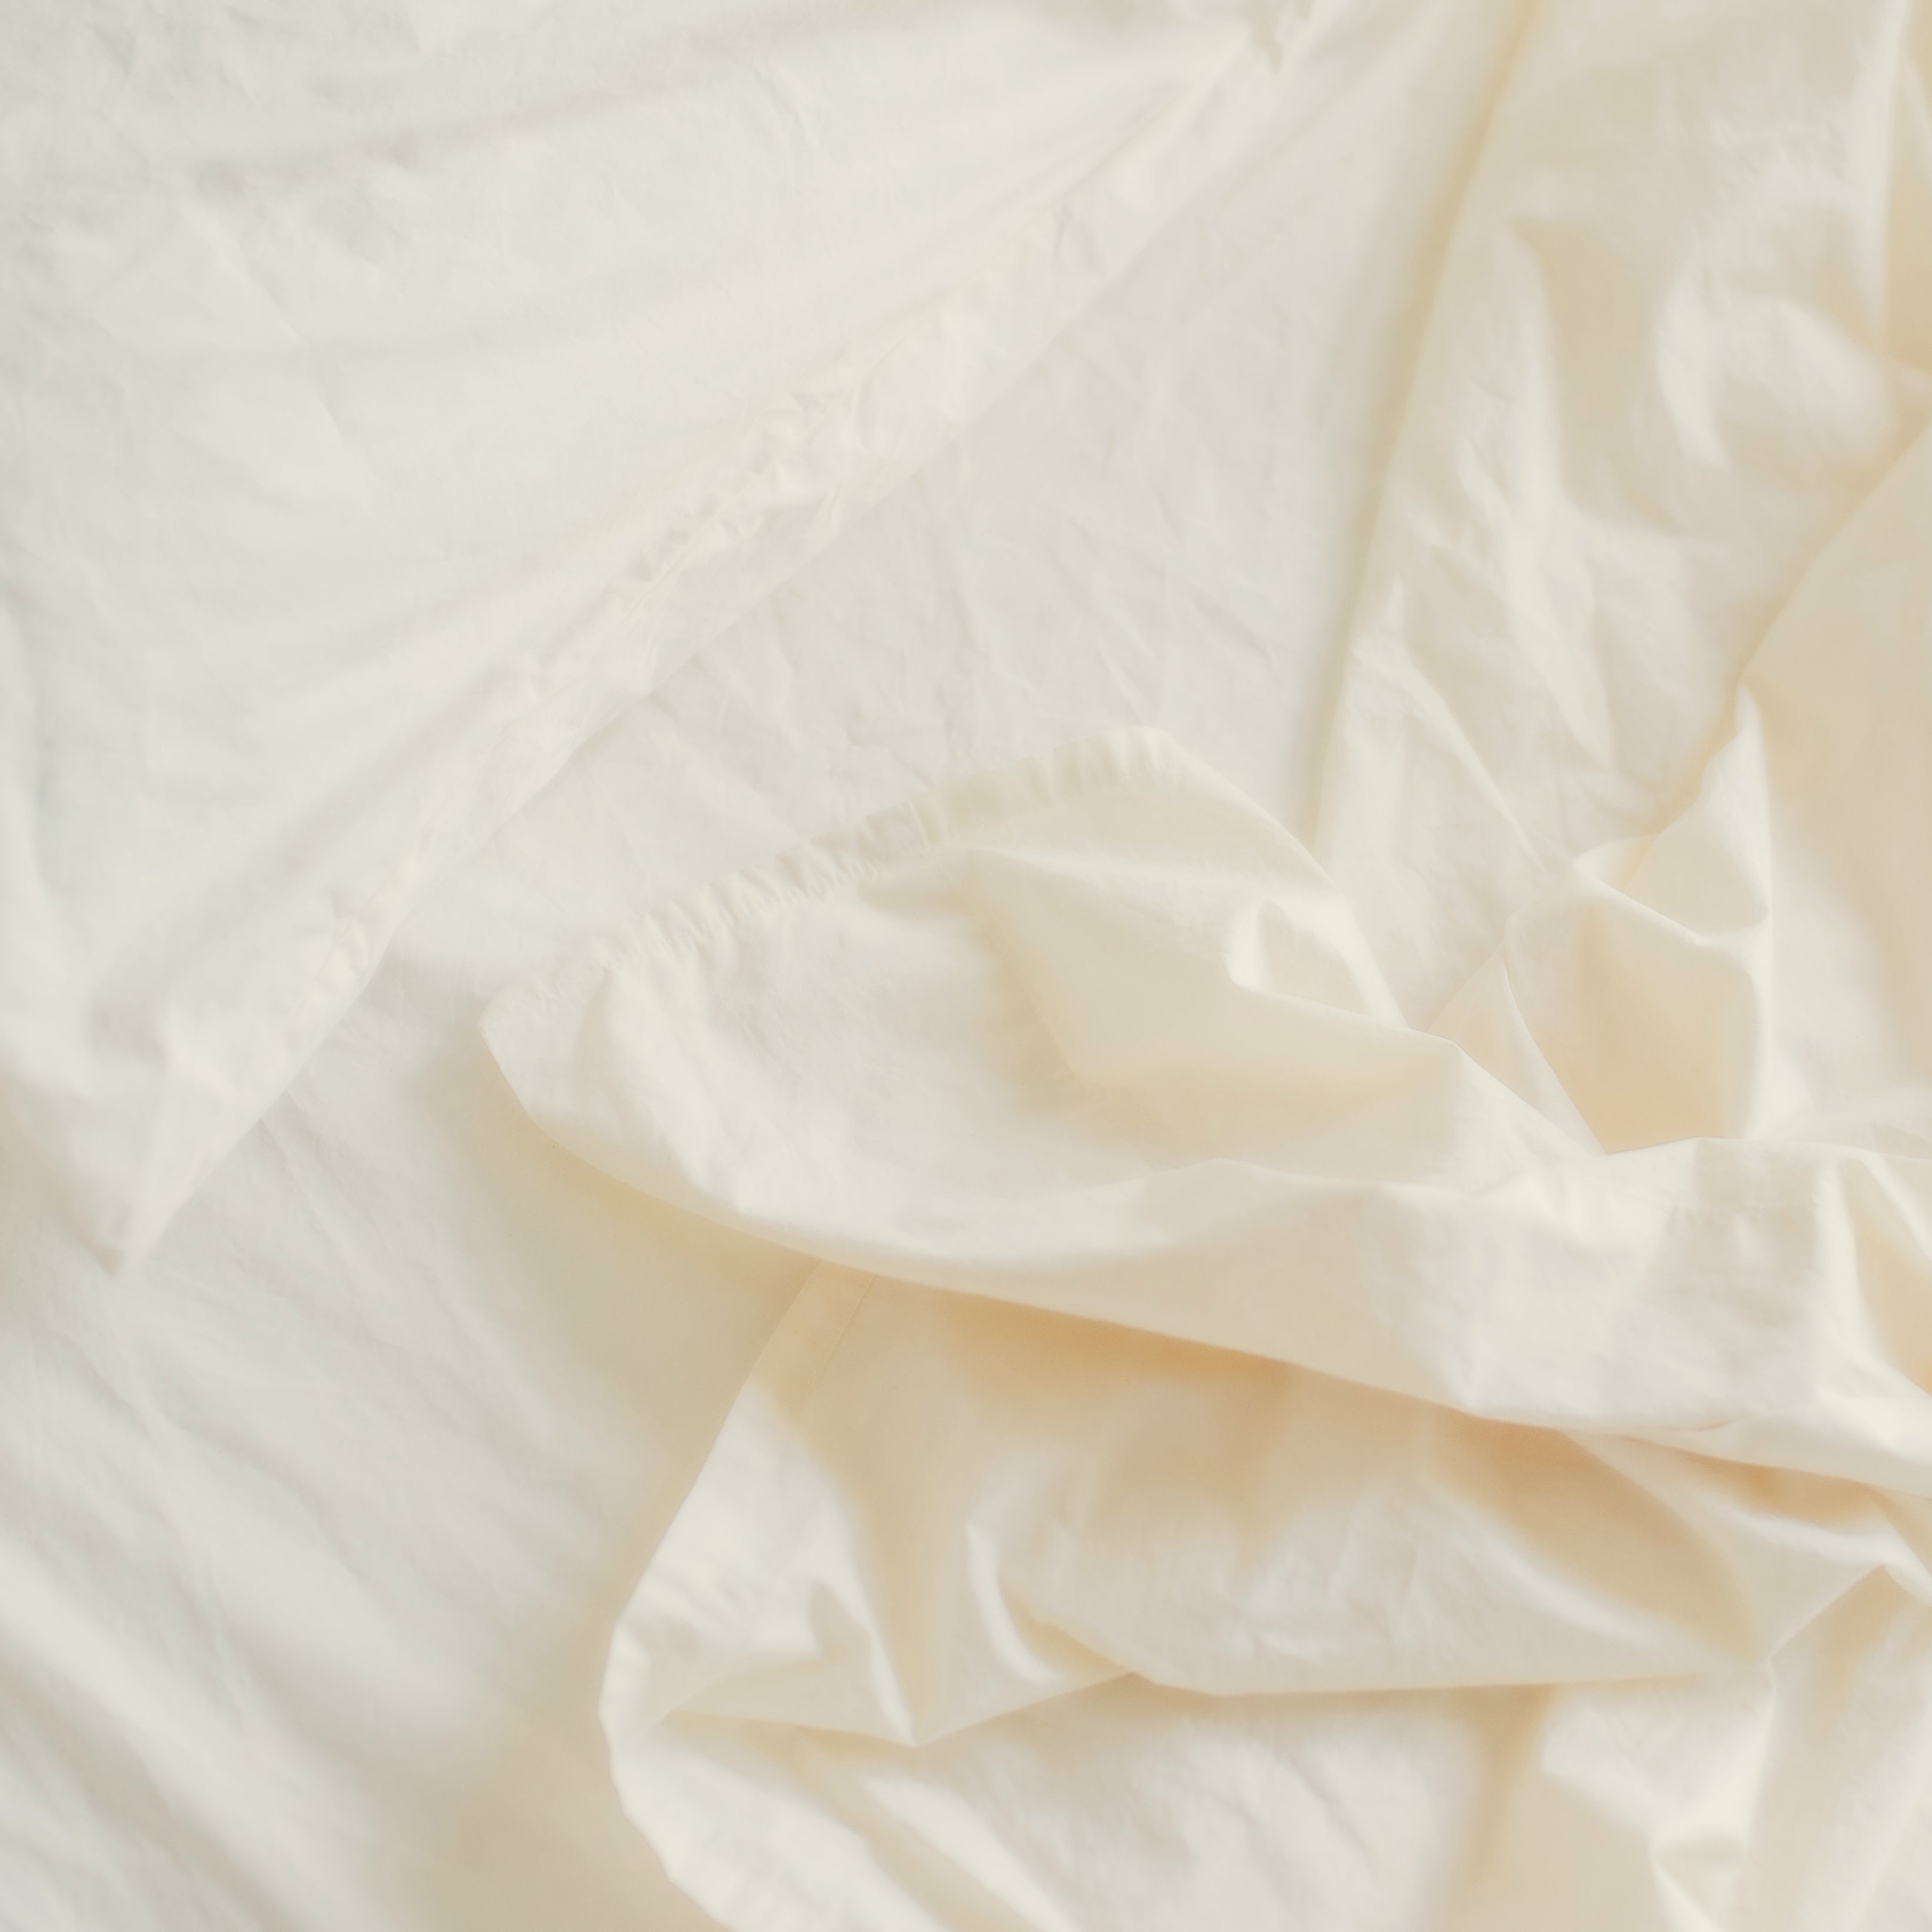 A detail view showing the soft texture of Oolie organic cotton sheets in natural, unbleached cotton installed on a bed.